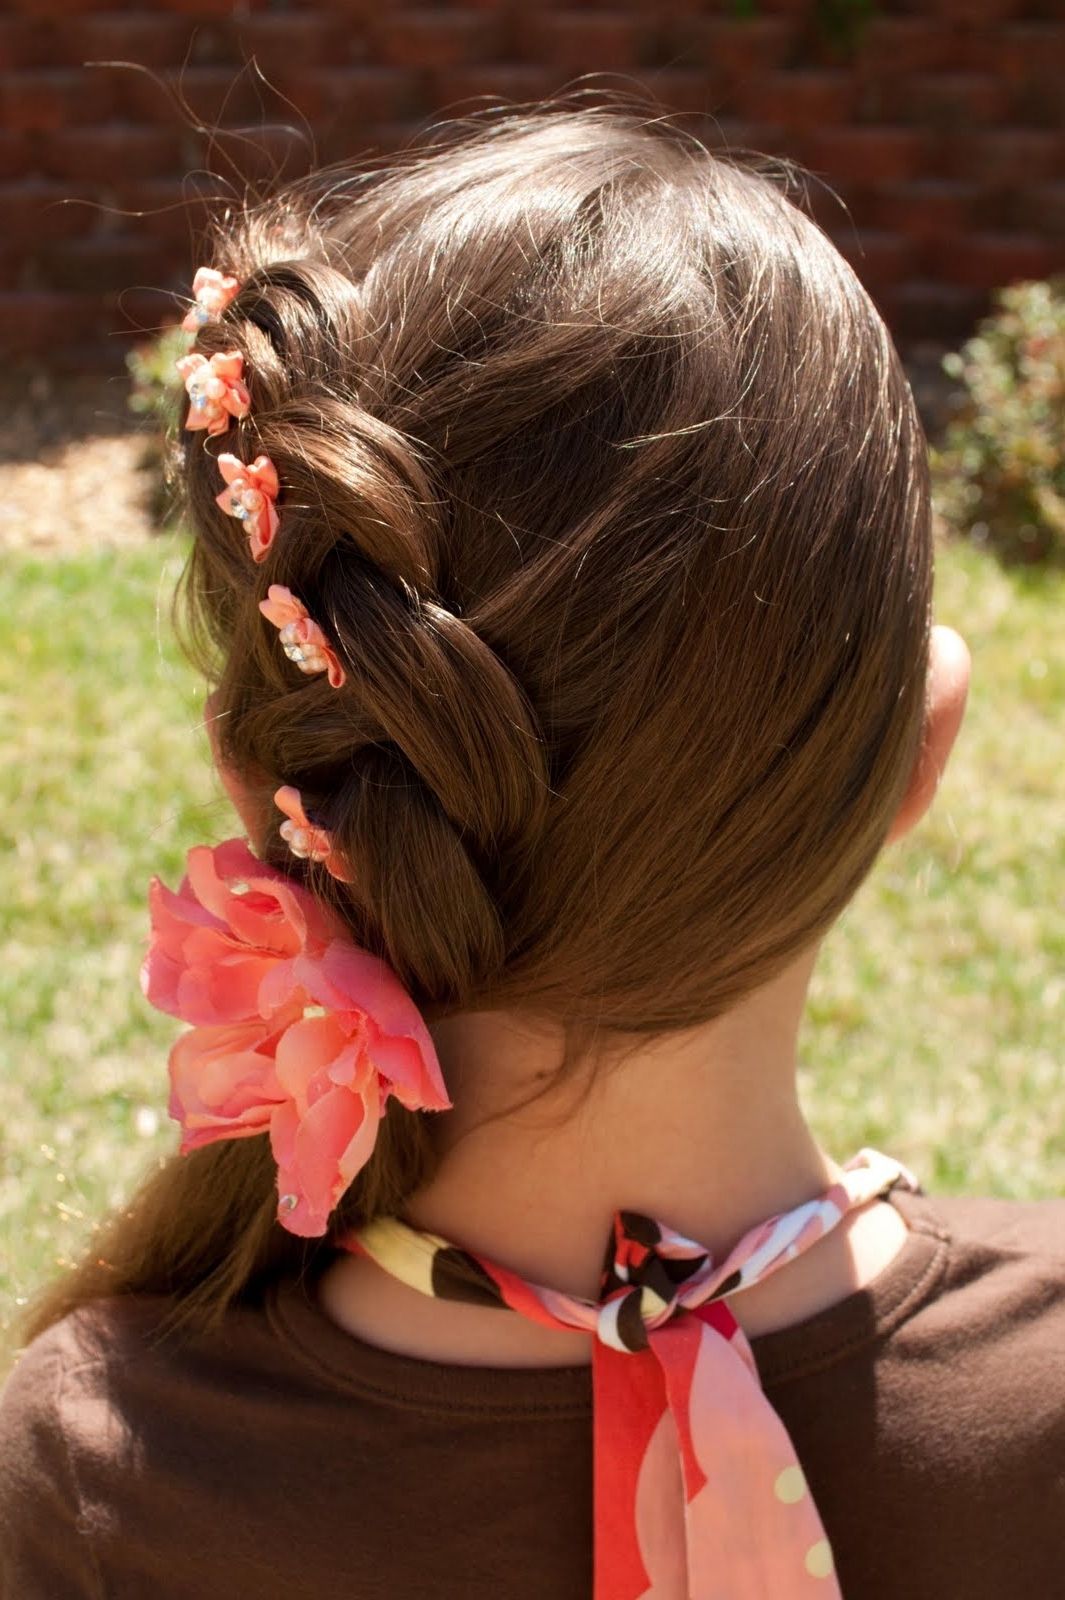 Loosey Goosey ~ New Hairstyles Today Pertaining To Popular Loosey Goosey Ponytail Hairstyles (View 18 of 20)